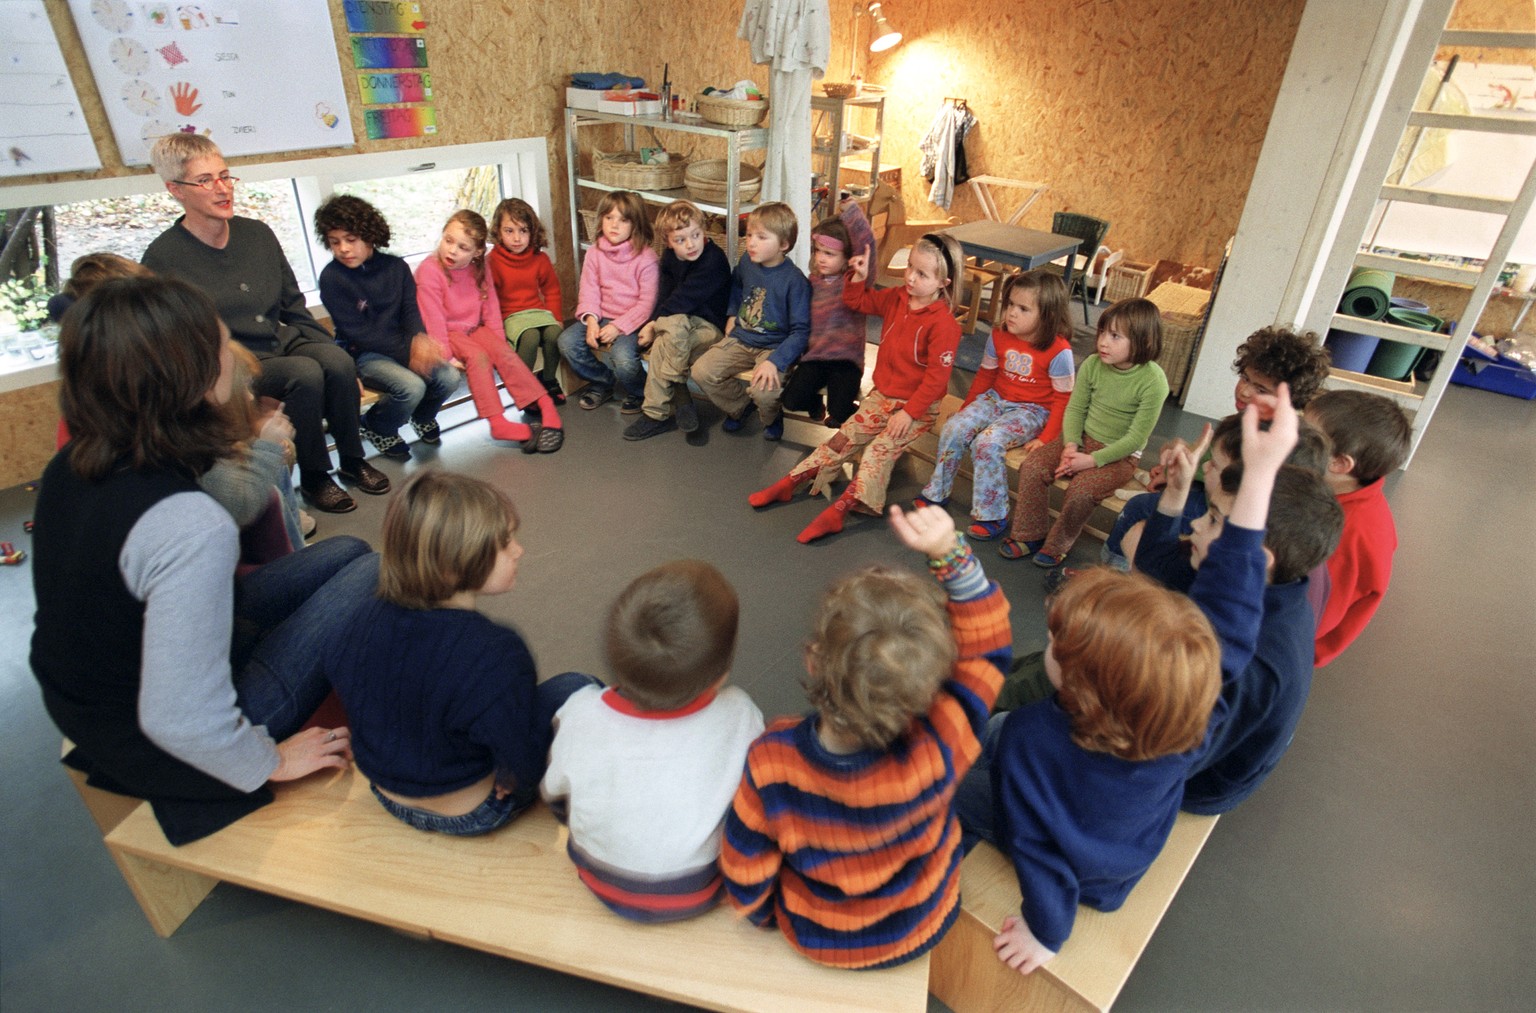 Elementary level pupils of the comprehensive school Unterstrass in Zurich, Switzerland, sit in a circle together with their teachers, pictured on November 26, 2002. At the elementary level kindergarde ...